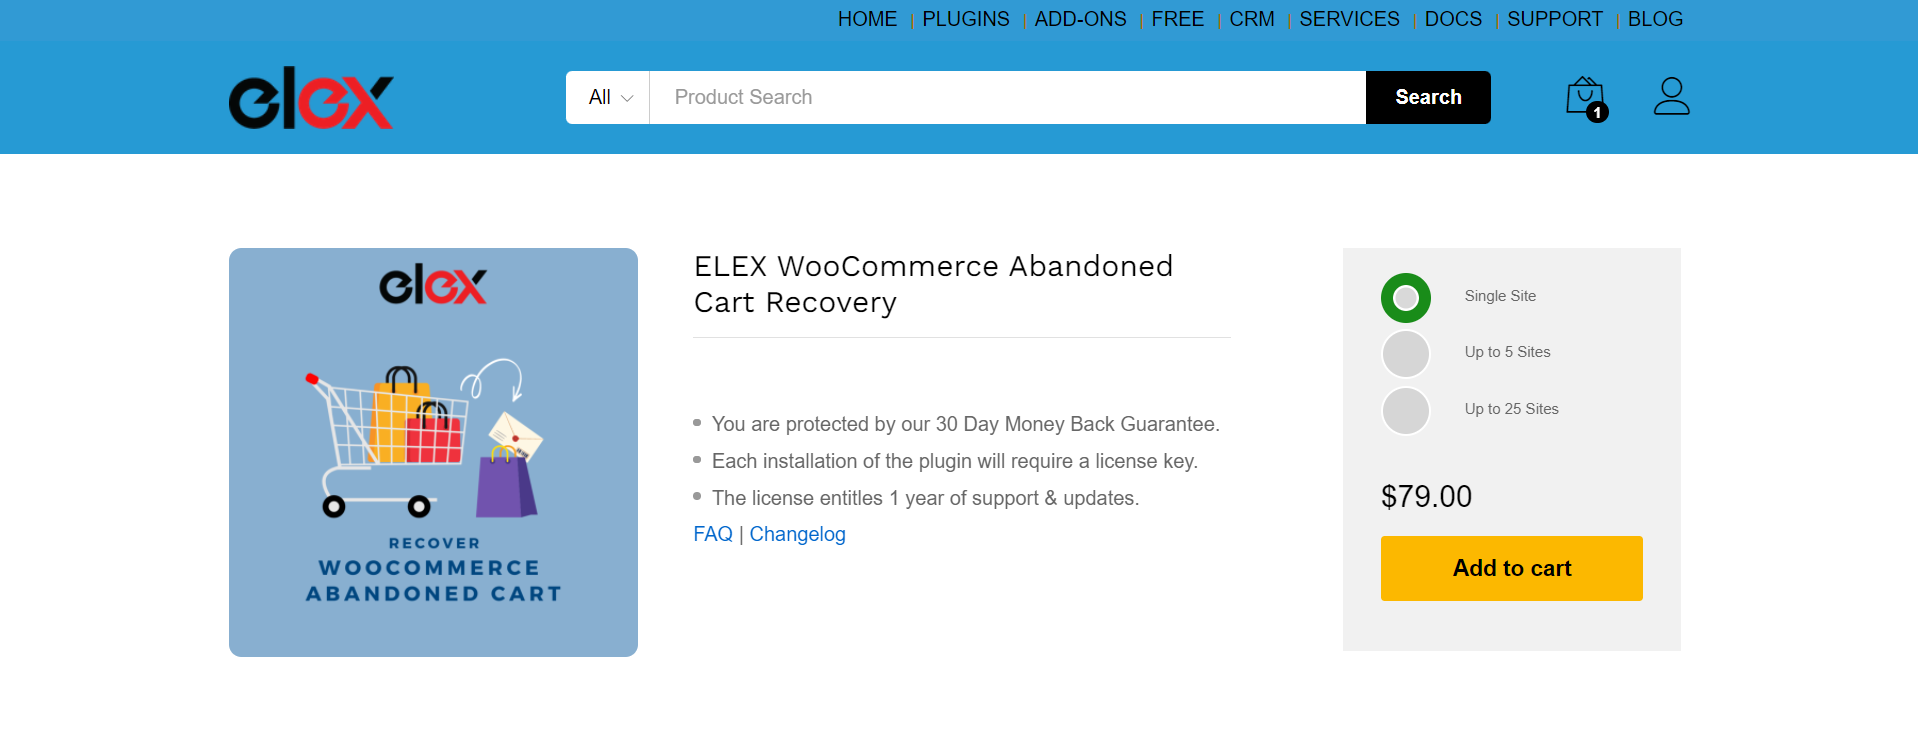 ELEX Abandoned Cart Recovery plugin product page with a price of $79 for a single site.